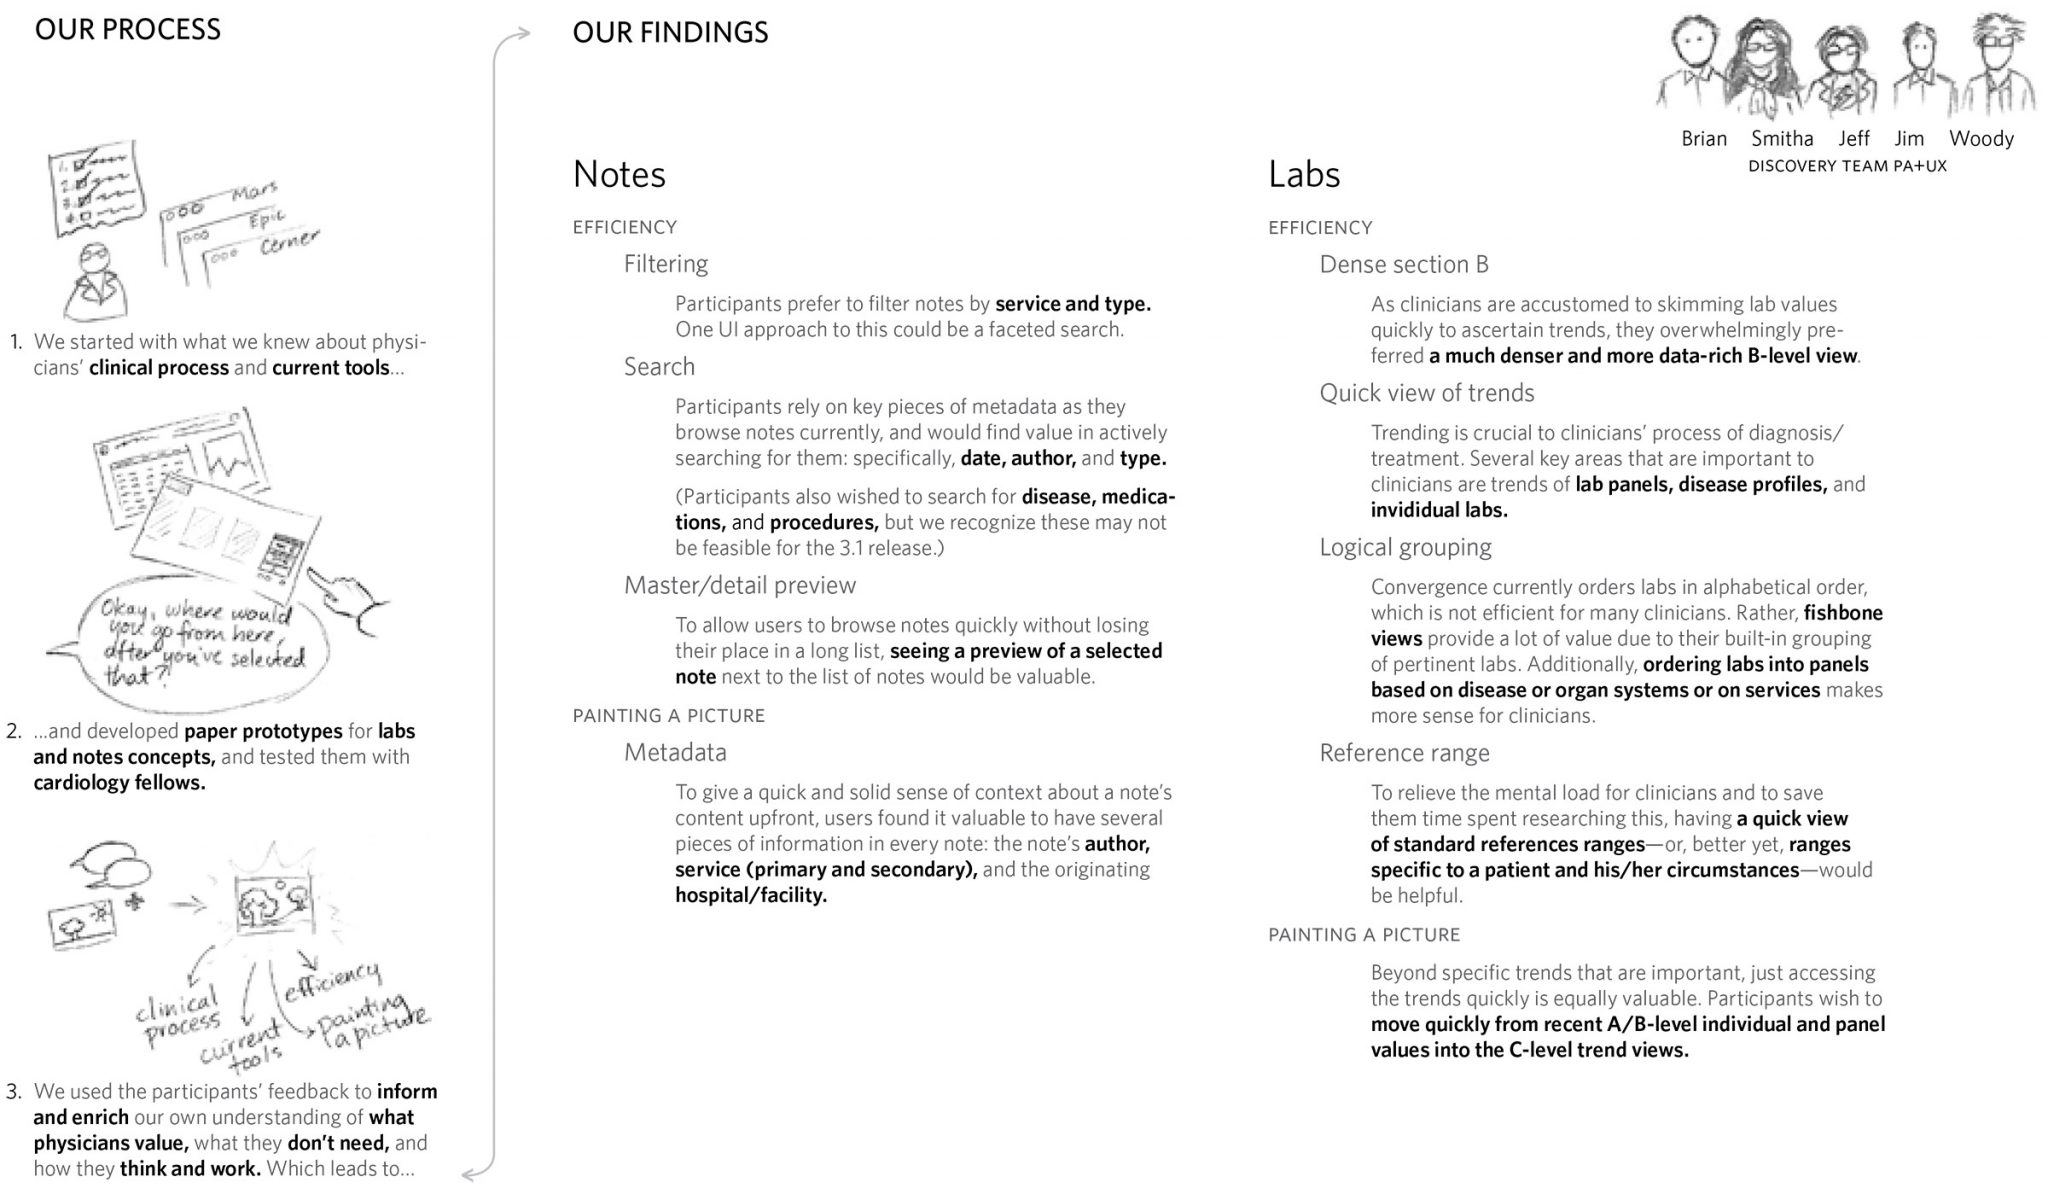 Synthesis document, part 2. A quick sketched column on the left showing our research and synthesis process, and then 2 columns of findings, one each for the Notes and Labs sections of the app.